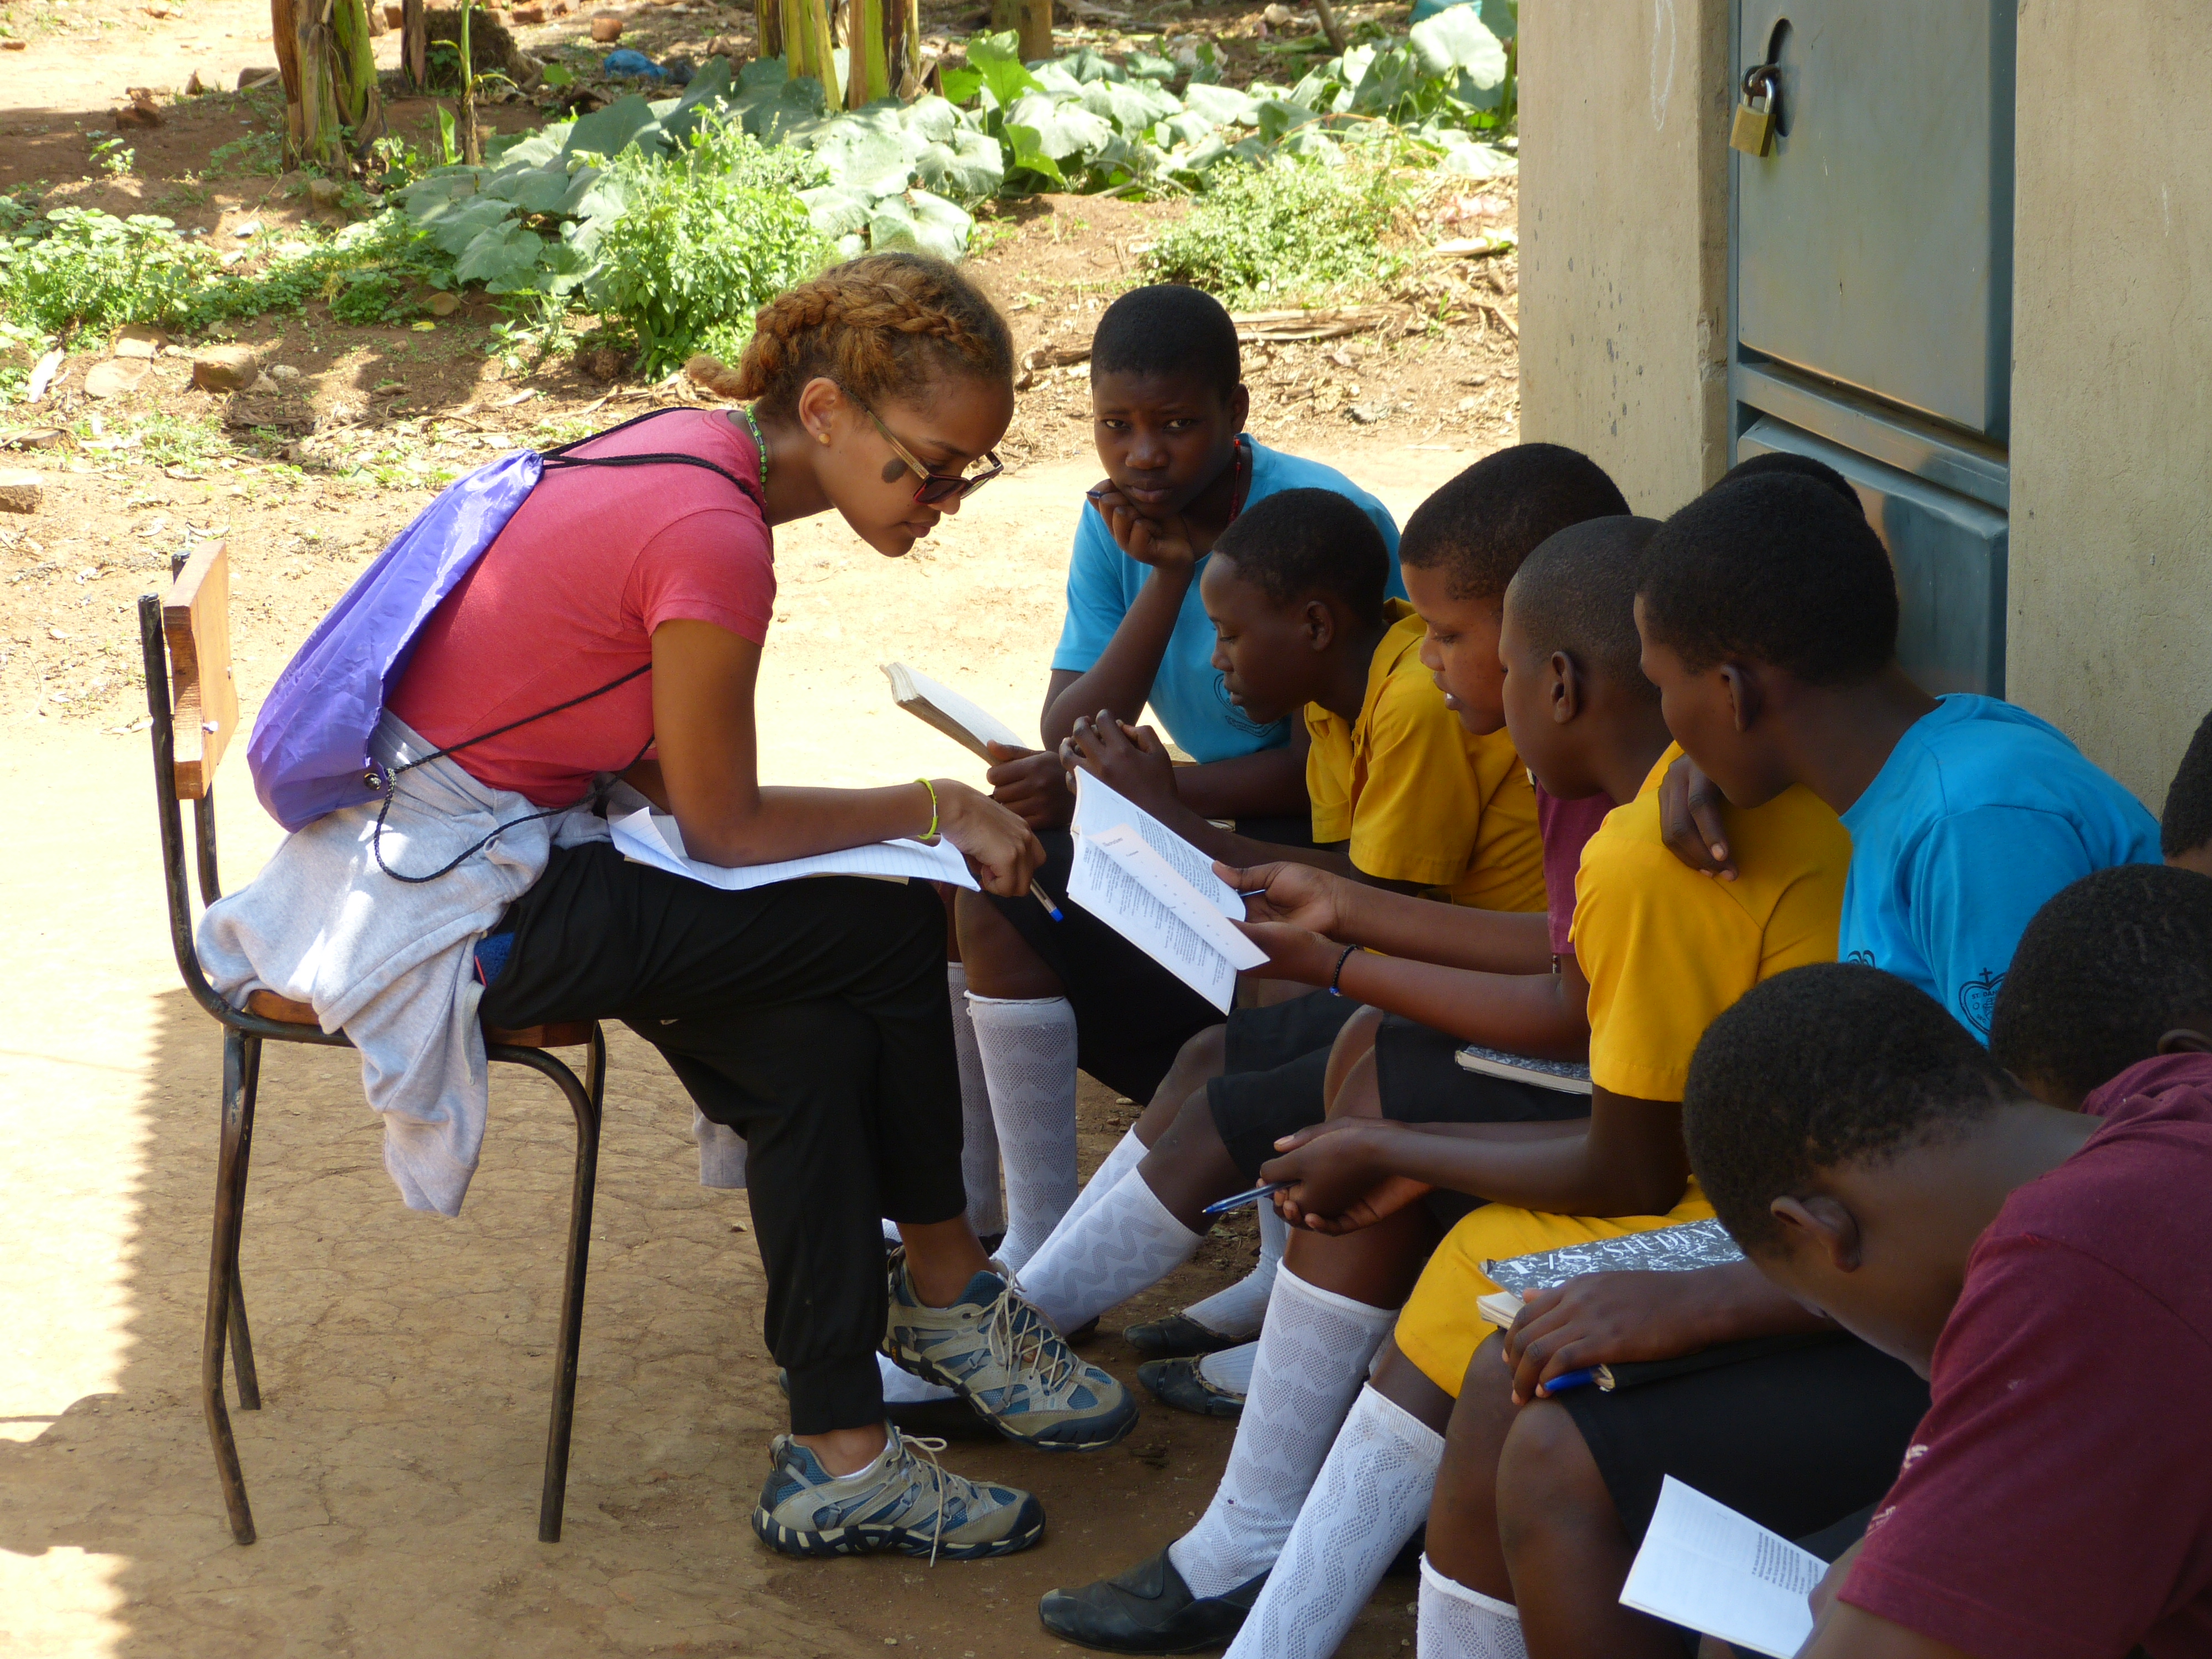 A young black woman with light-colored hair is wearing a pink T-shirt, black pants, sneakers, glasses, and a small cloth backpack. She is sitting on a chair, teaching a group of eight black boys, who are all sitting side by side looking at books. Some are also holding composition notebooks. The lesson is taking place outdoors, on a bench, and there are some vegetables growing in the background.